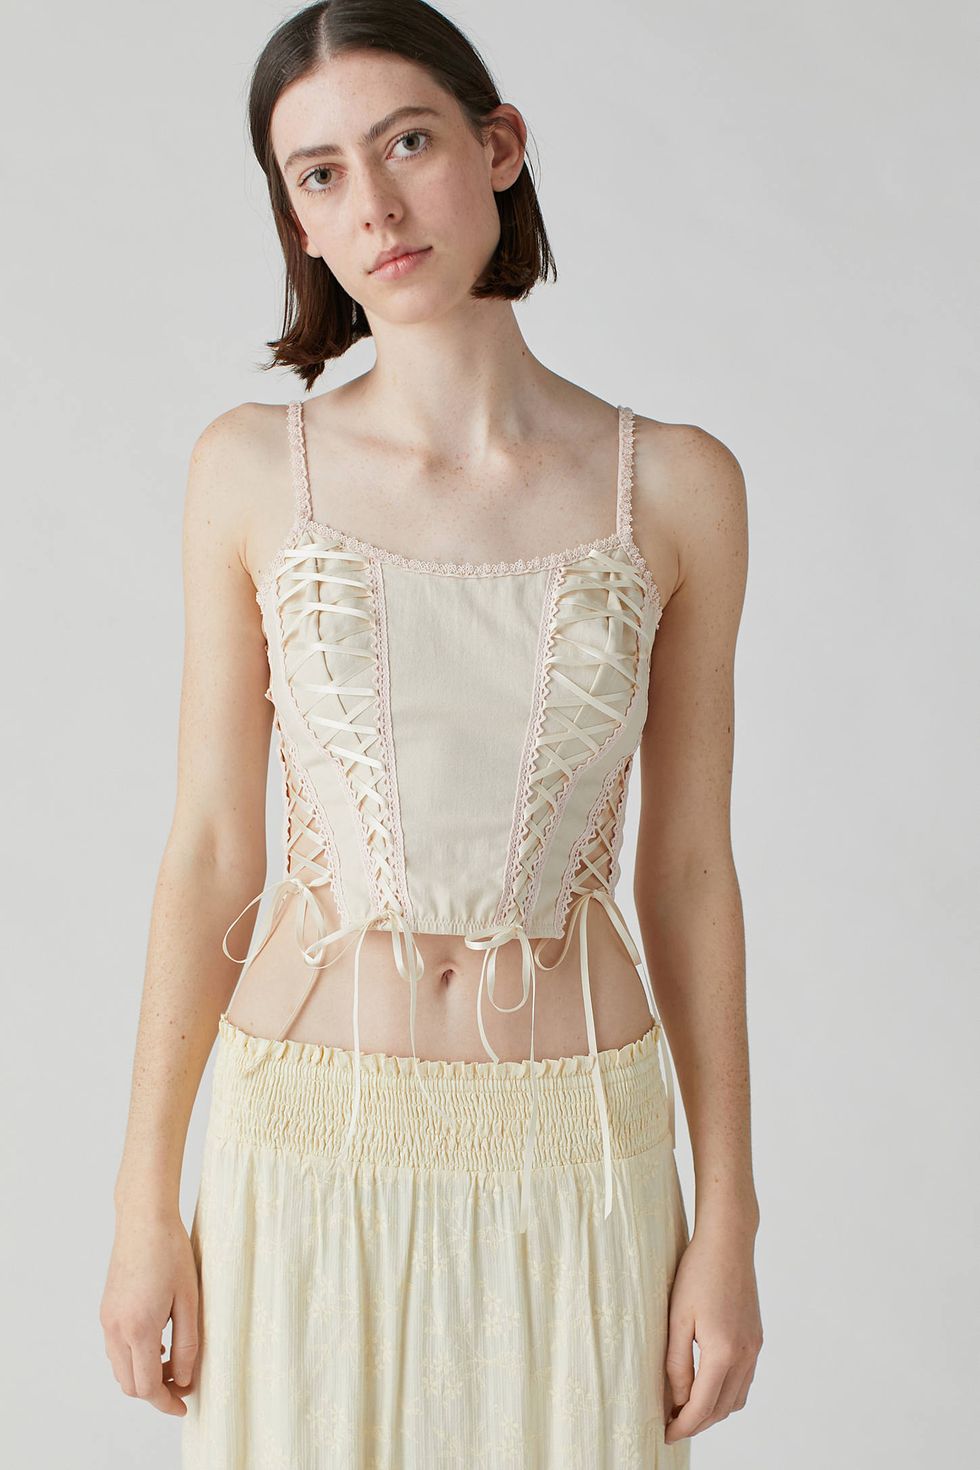 Urban Outfitters IVRY Out From Under Modern Love Butterfly Corset